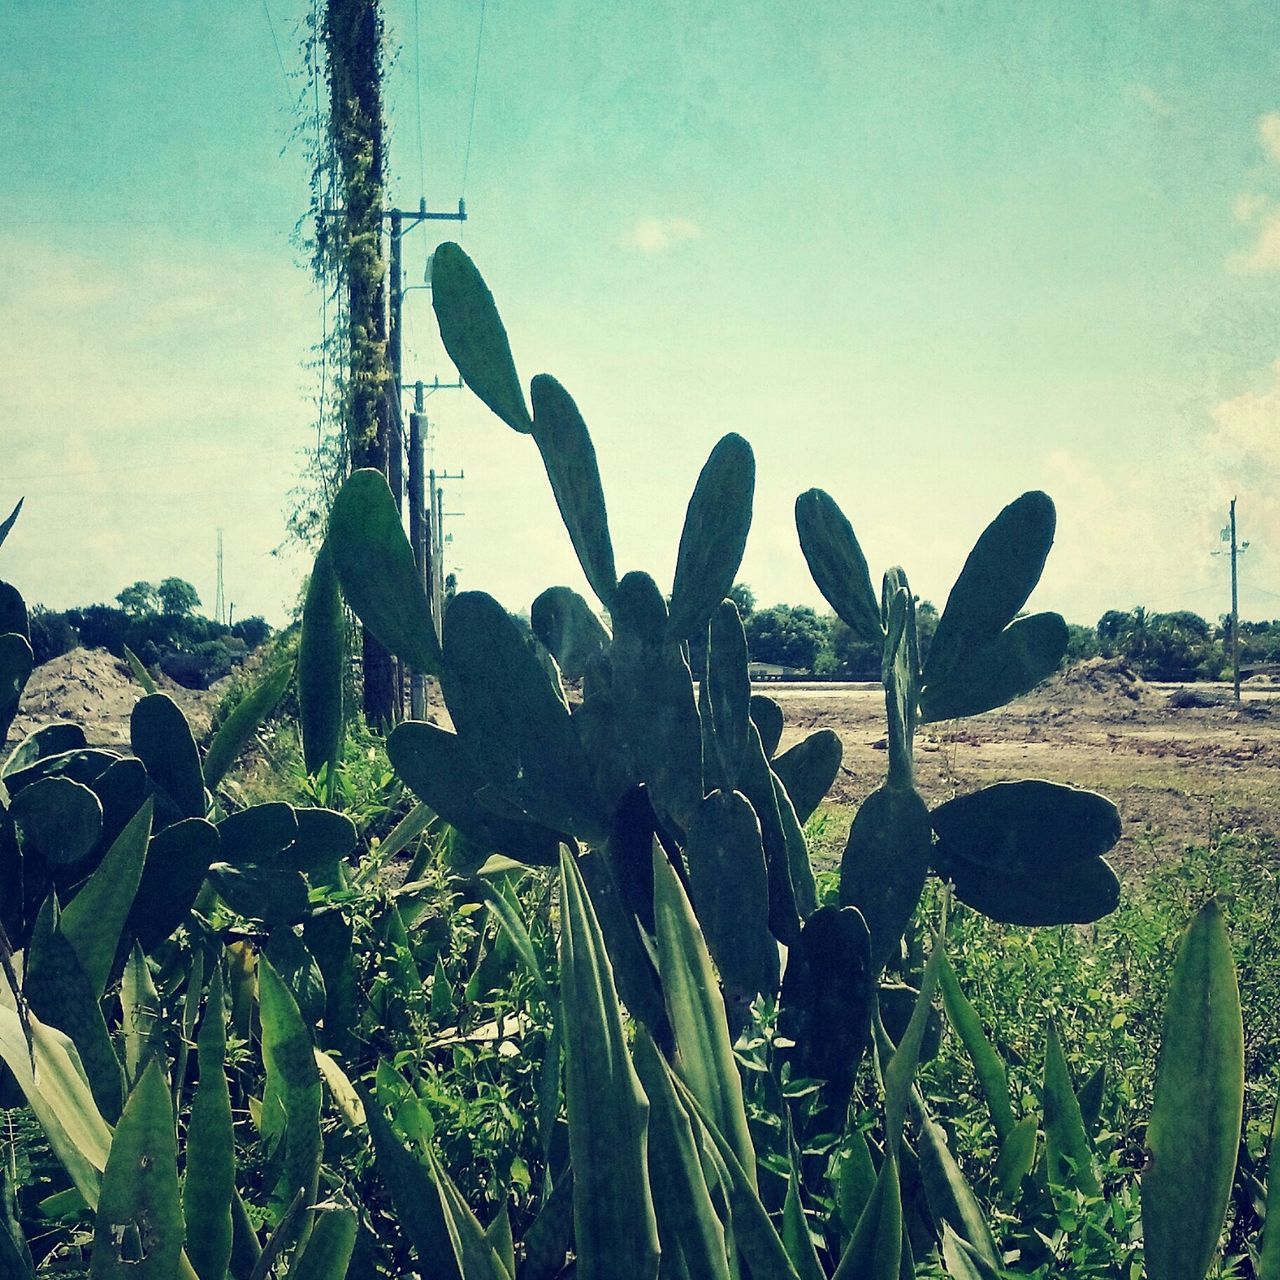 sky, plant, growth, cactus, field, low angle view, nature, cloud - sky, flower, tranquility, cloud, day, grass, outdoors, no people, beauty in nature, close-up, green color, sunlight, rural scene